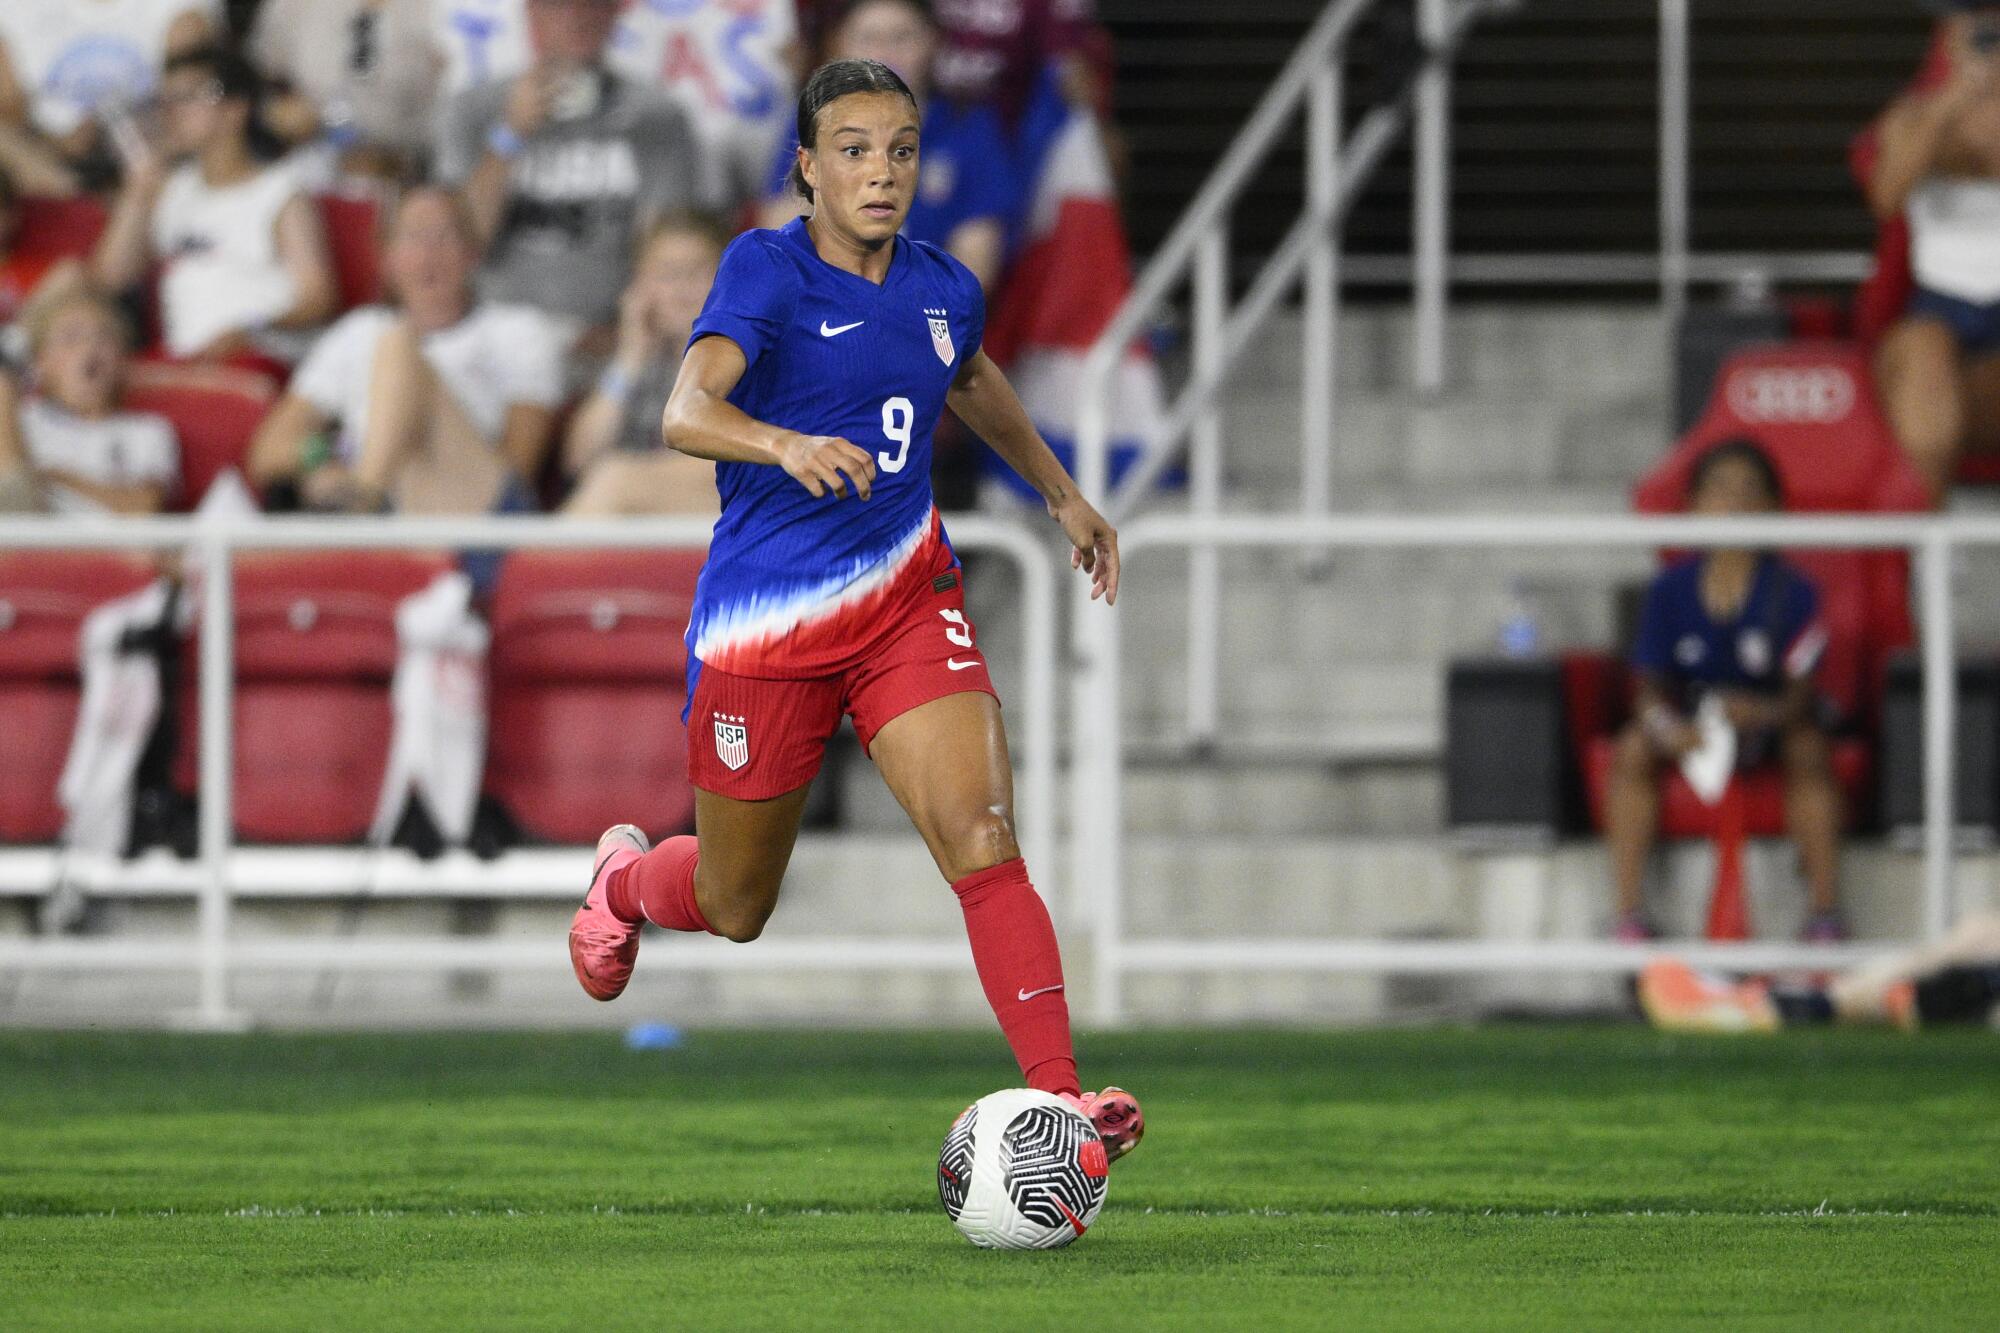 U.S. forward Mallory Swanson controls the ball during an international friendly against Costa Rica on July 16.